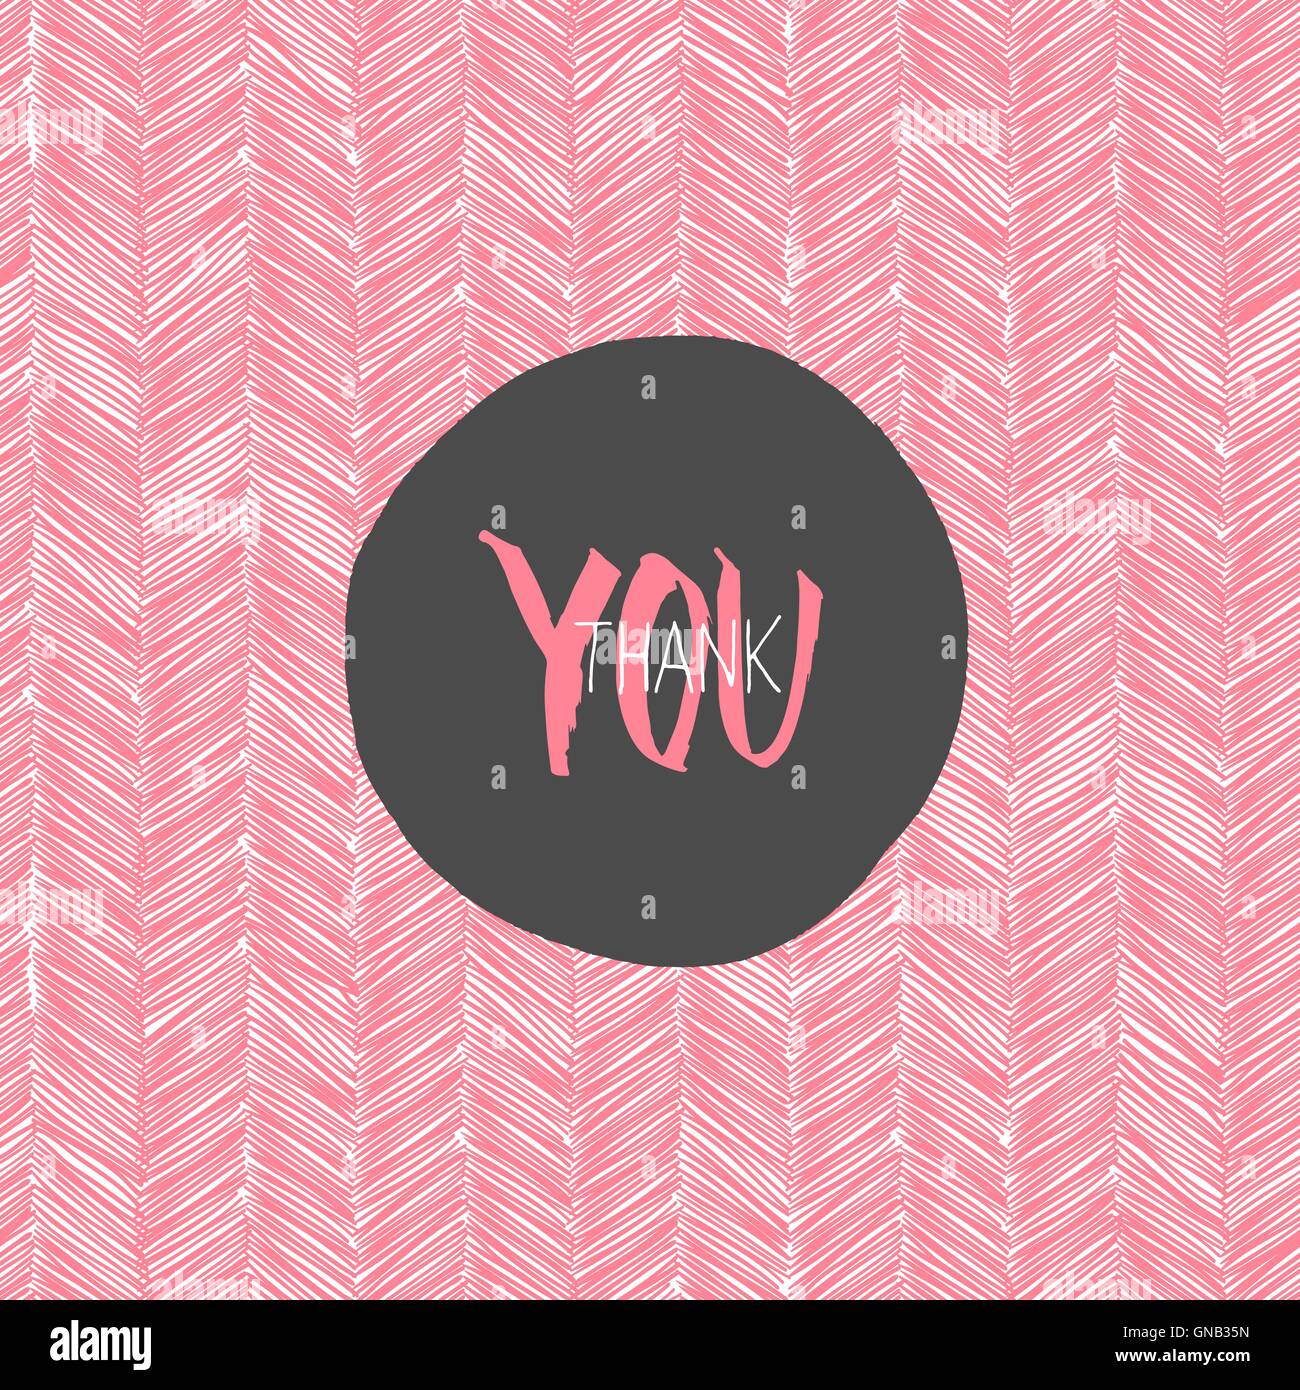 Thank You Hand Drawn Card Stock Vector